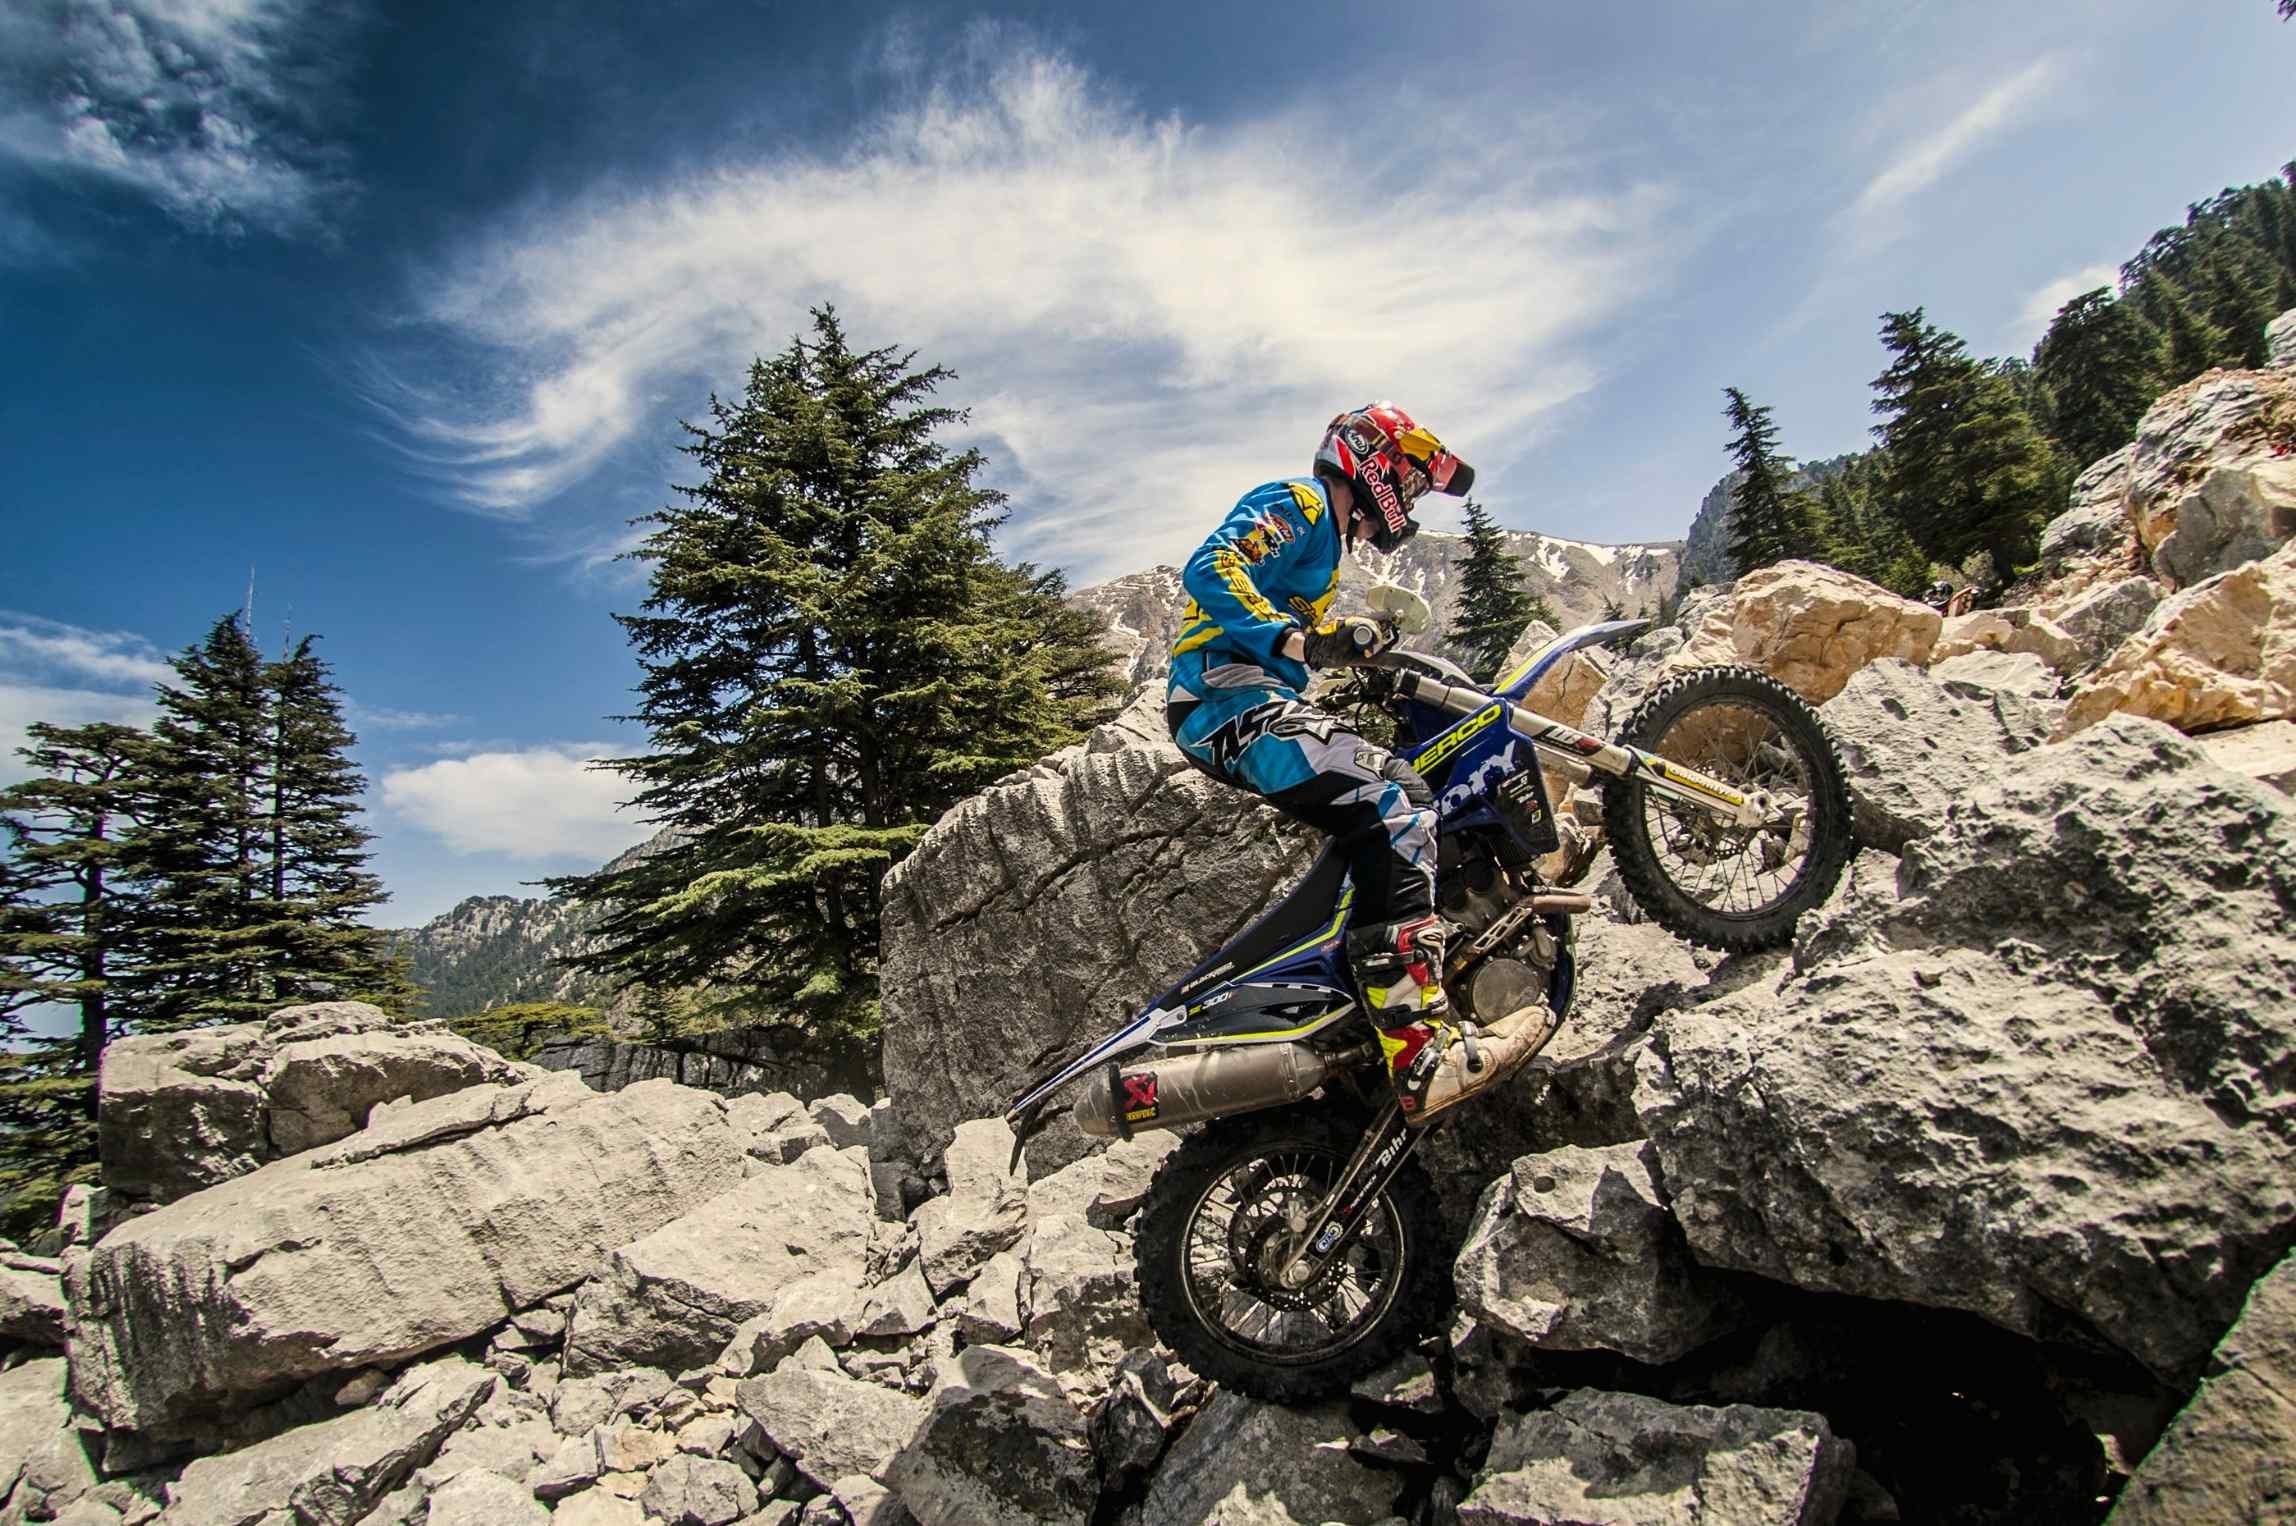 Enduro Motorbike: Сlimbing The Rock On The Bike, The Most Dangerous And Spectacular Part Of The Race, Red Bull. 2300x1530 HD Wallpaper.